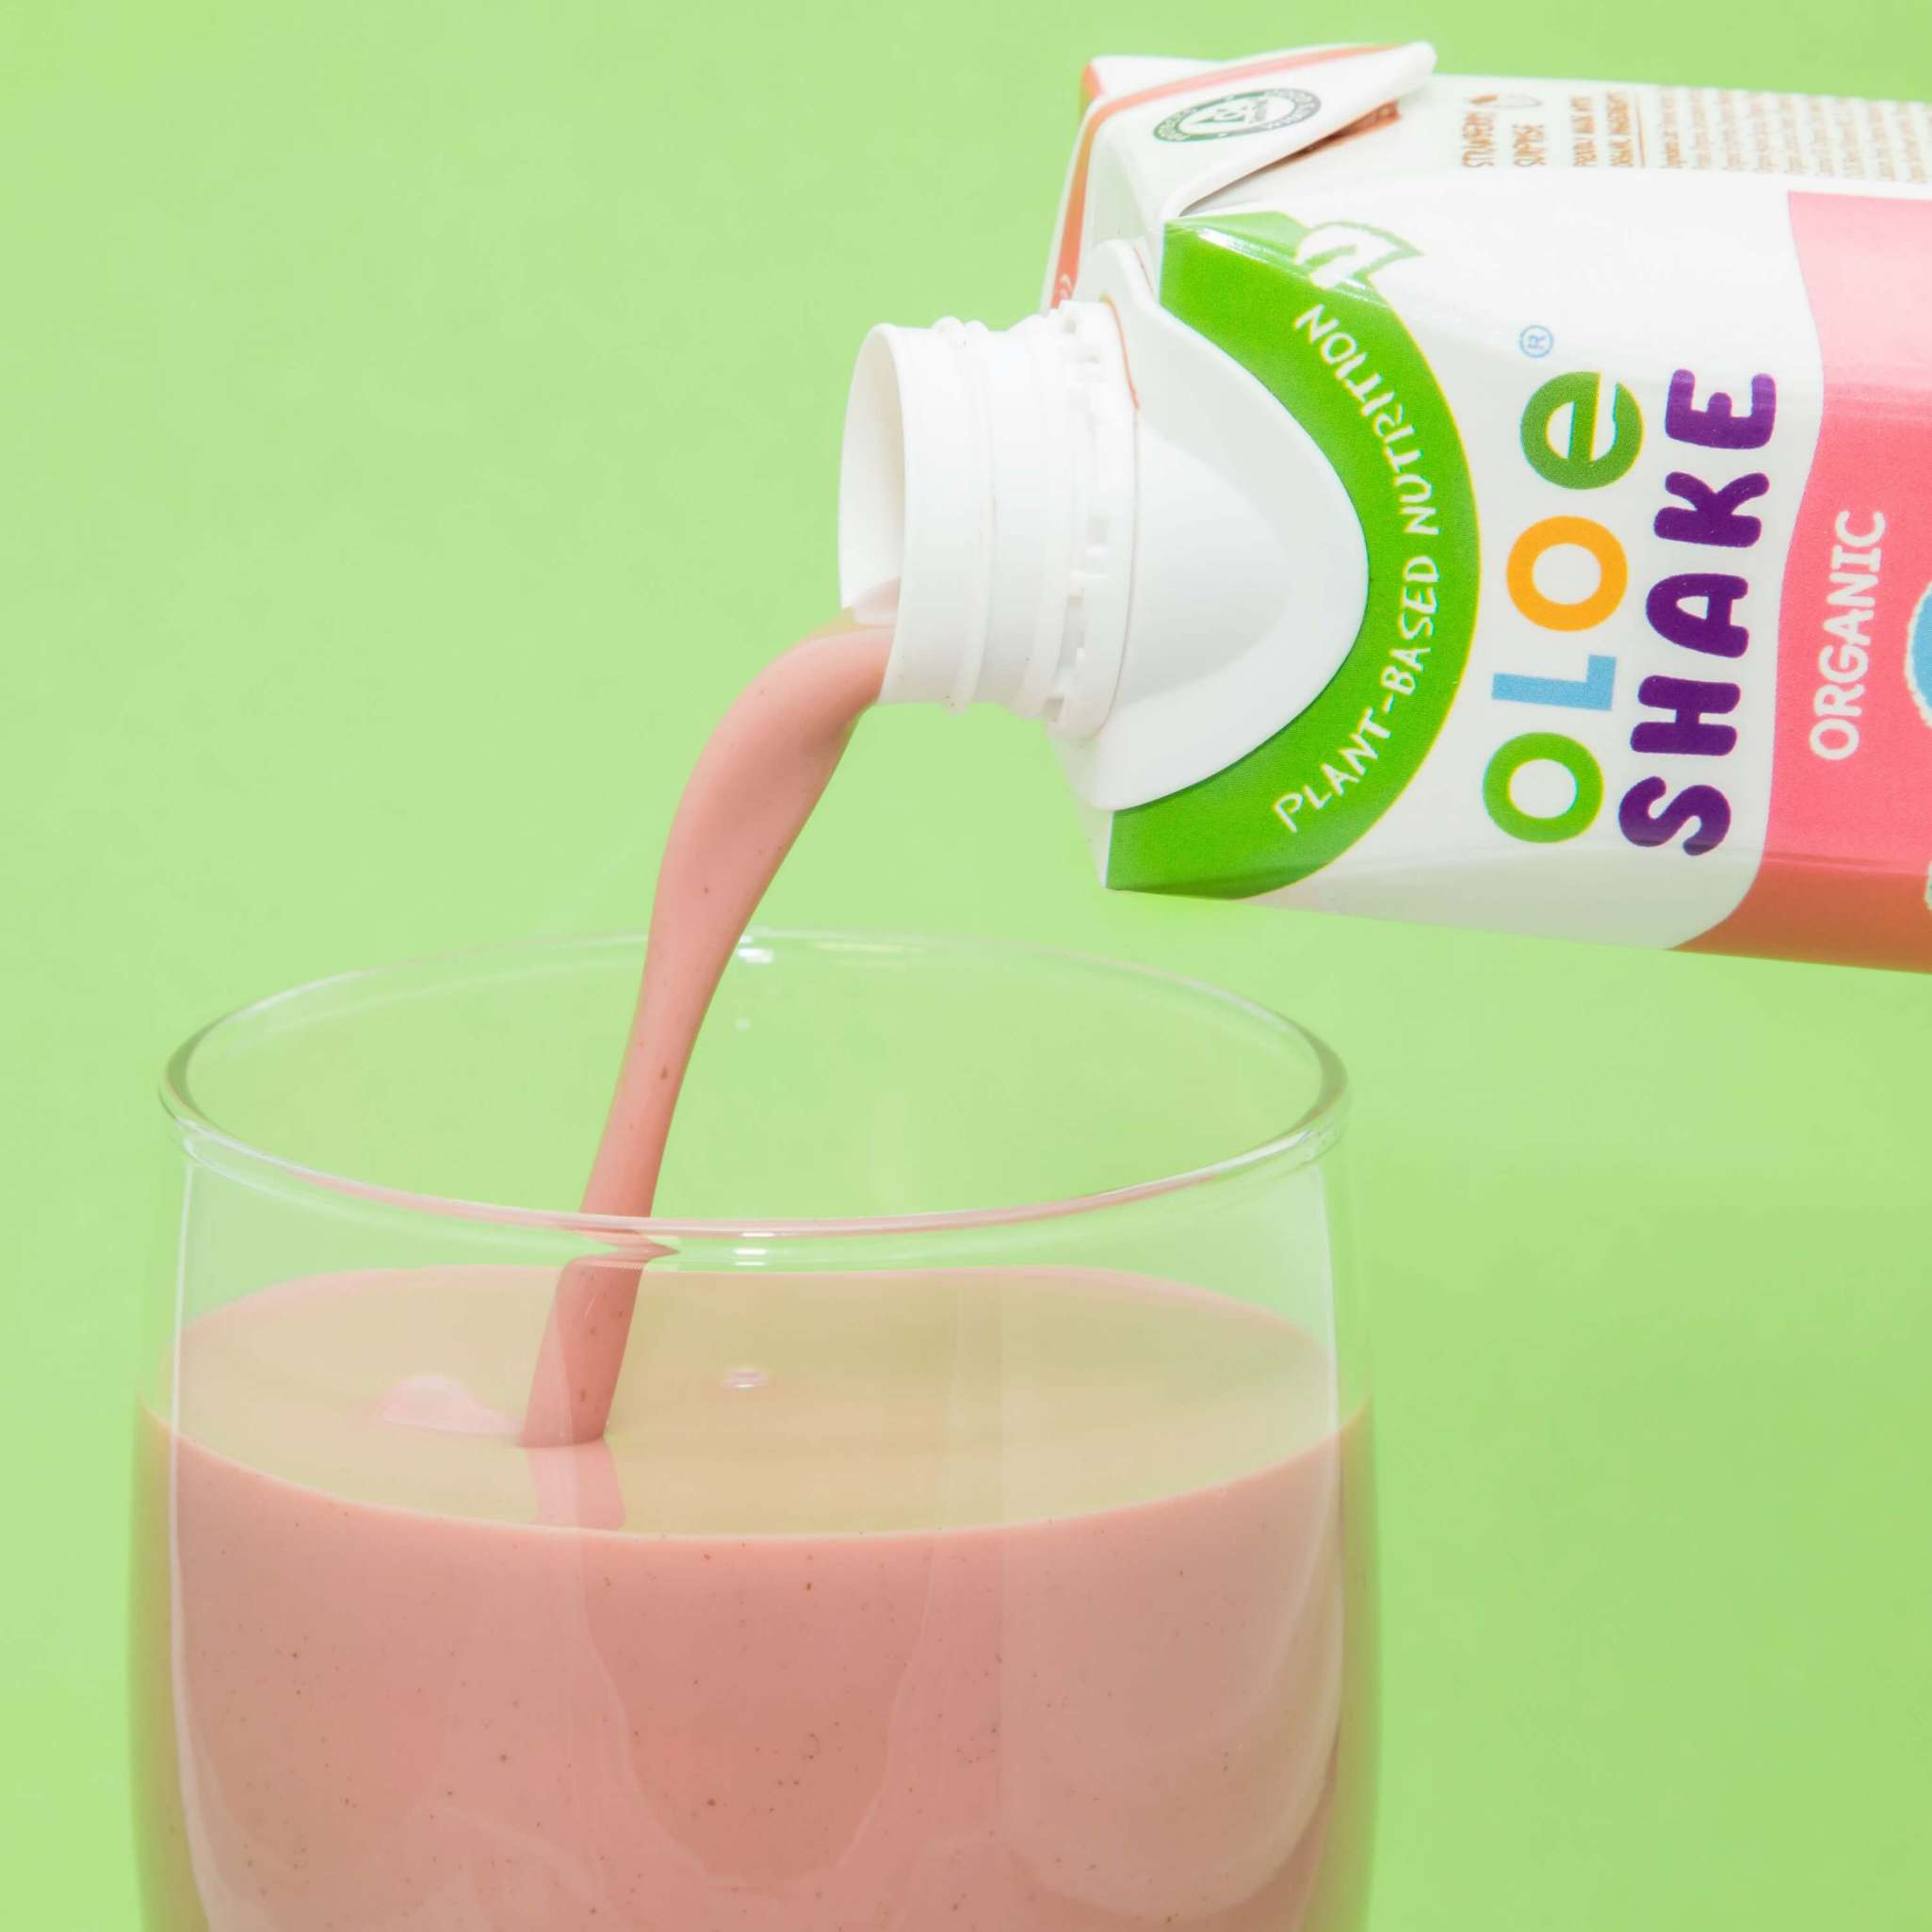 oloe-shake-strawberry-surprise-poured-into-a-glass-to-show-the-velvety-smooth-texture